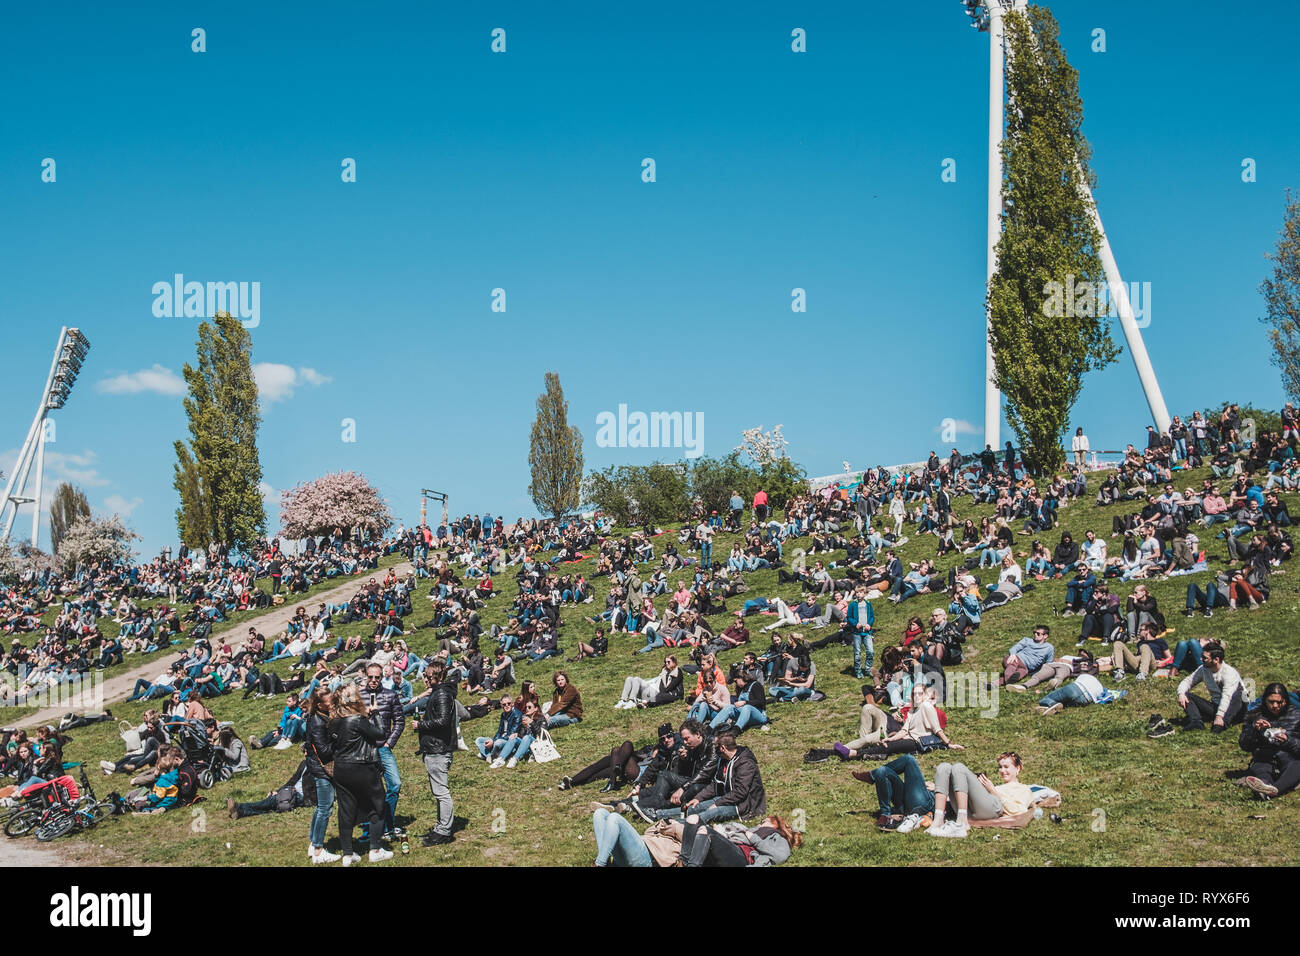 Berlin, Germany- april 2017: Young people in crowded park (Mauerpark) in Berlin, Germany on a sunny summer day Stock Photo